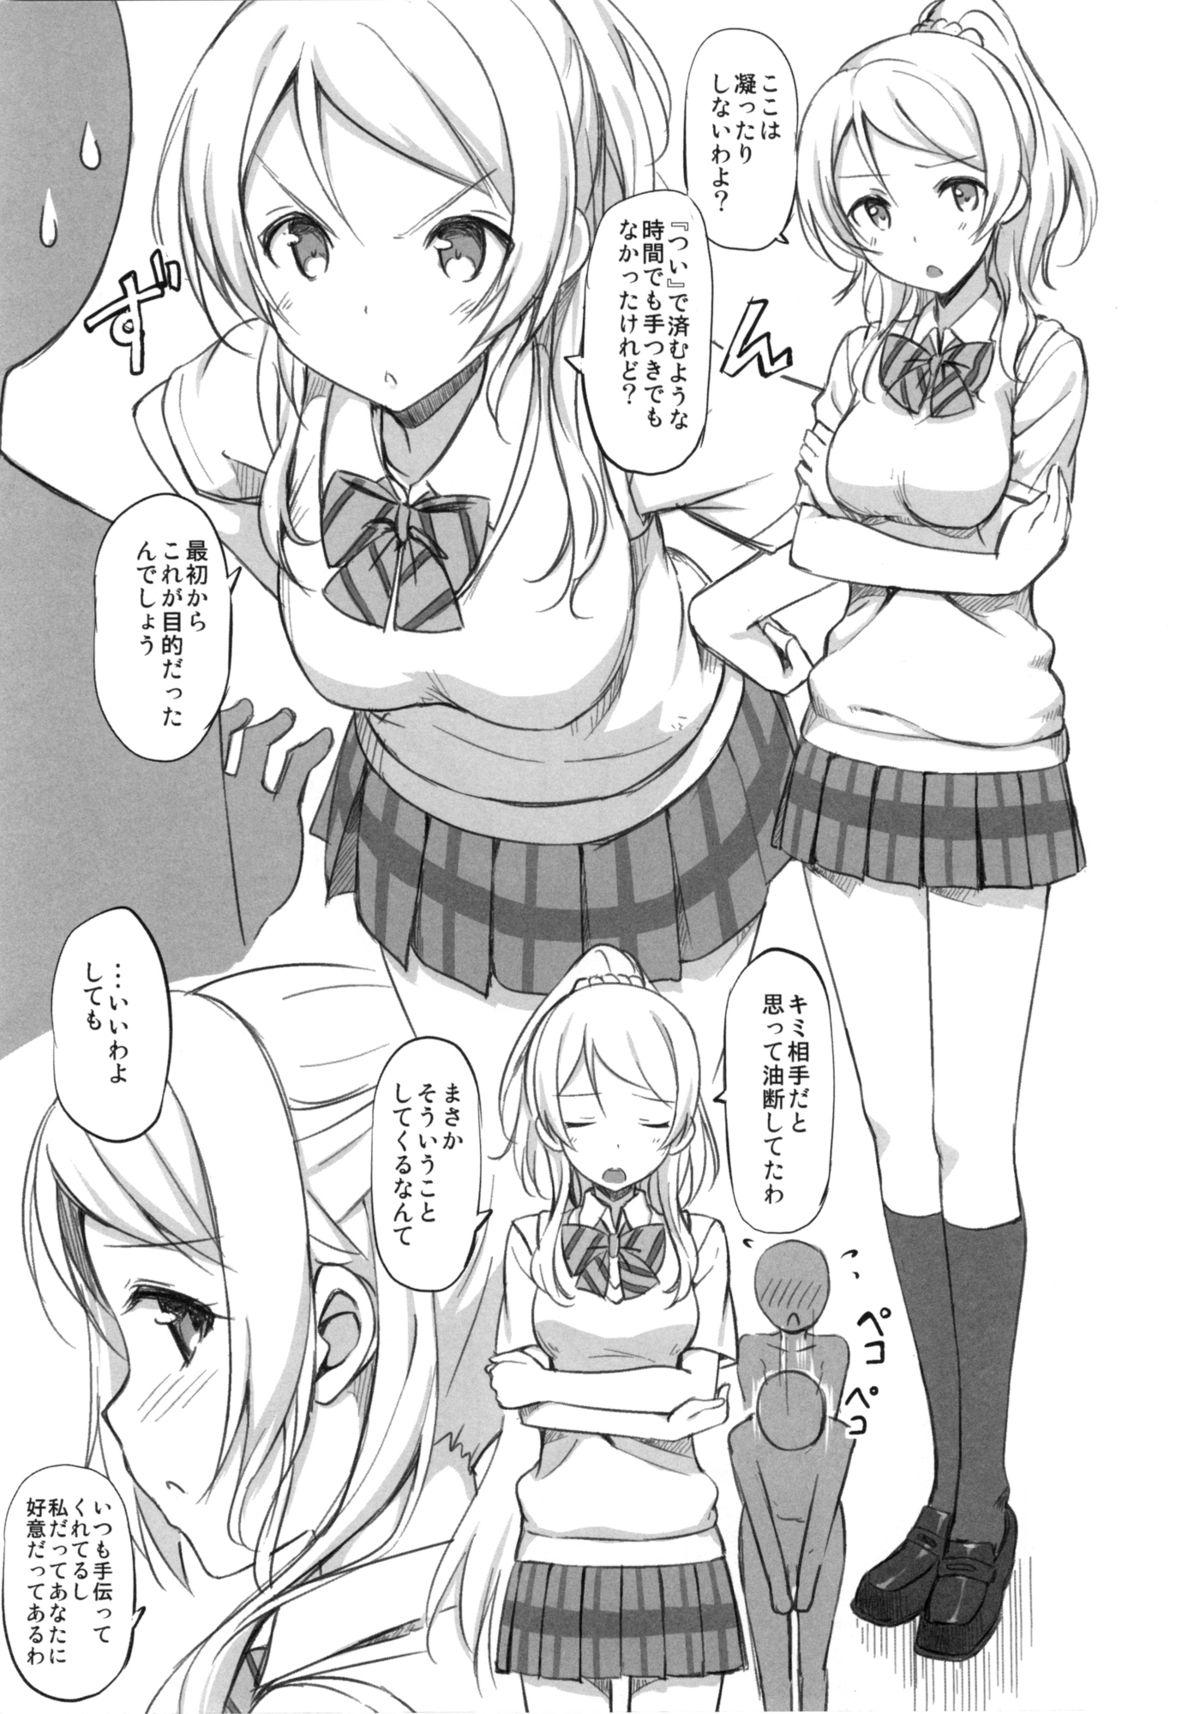 Consolo School ldol Off-shot + Omakebon - Love live Swallowing - Page 7